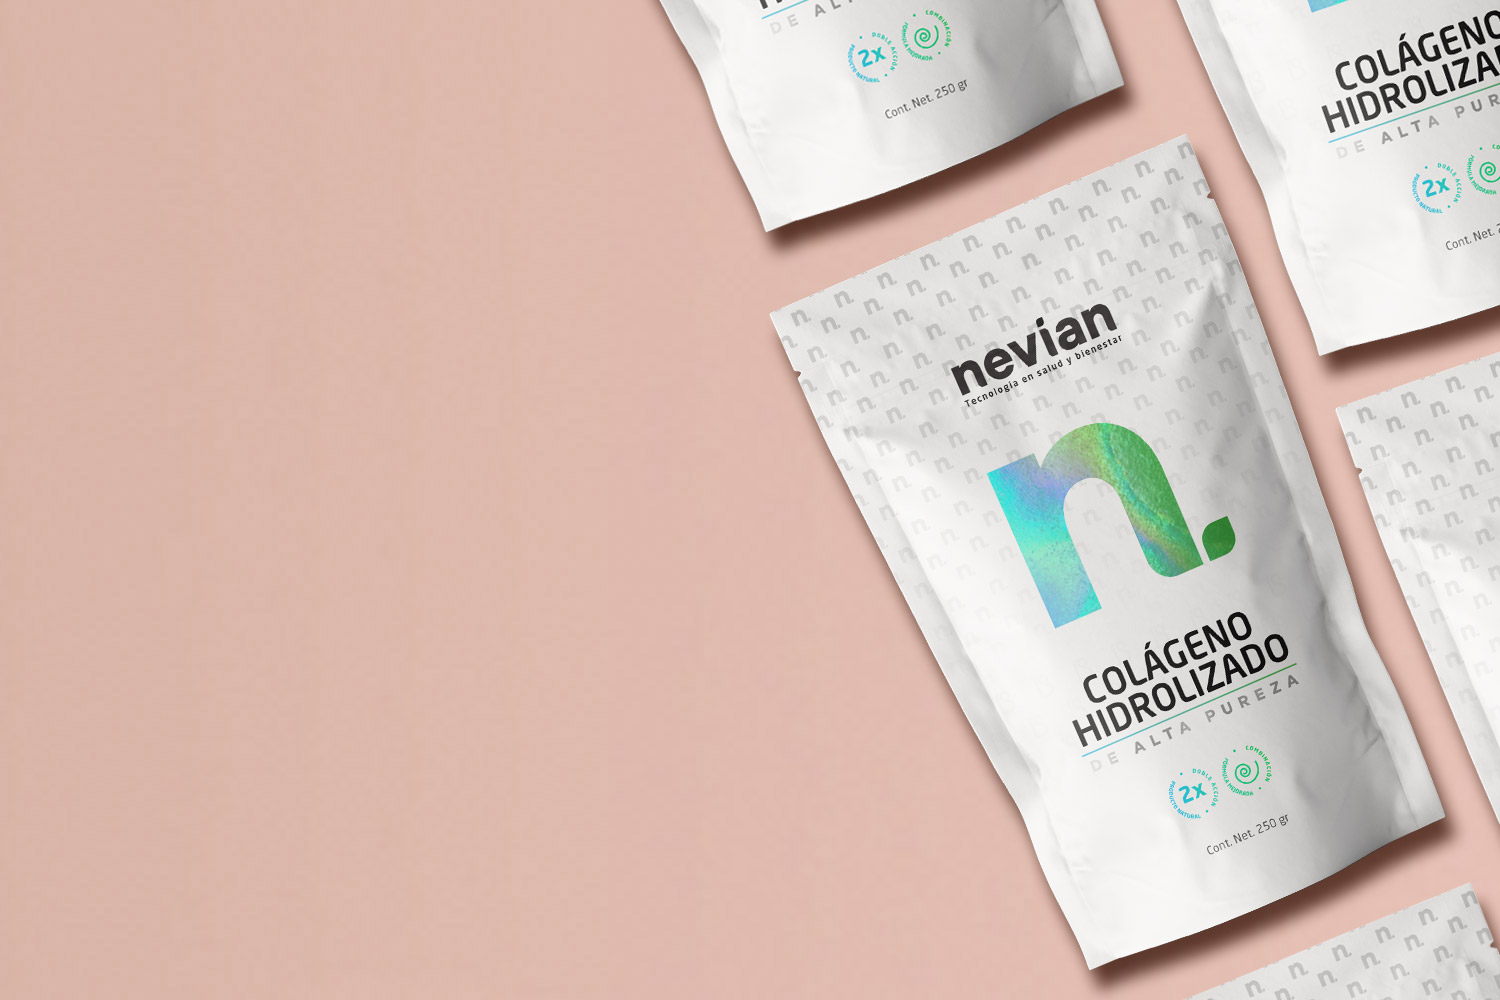 nevian Branding and Packaging by Dosmaquinas